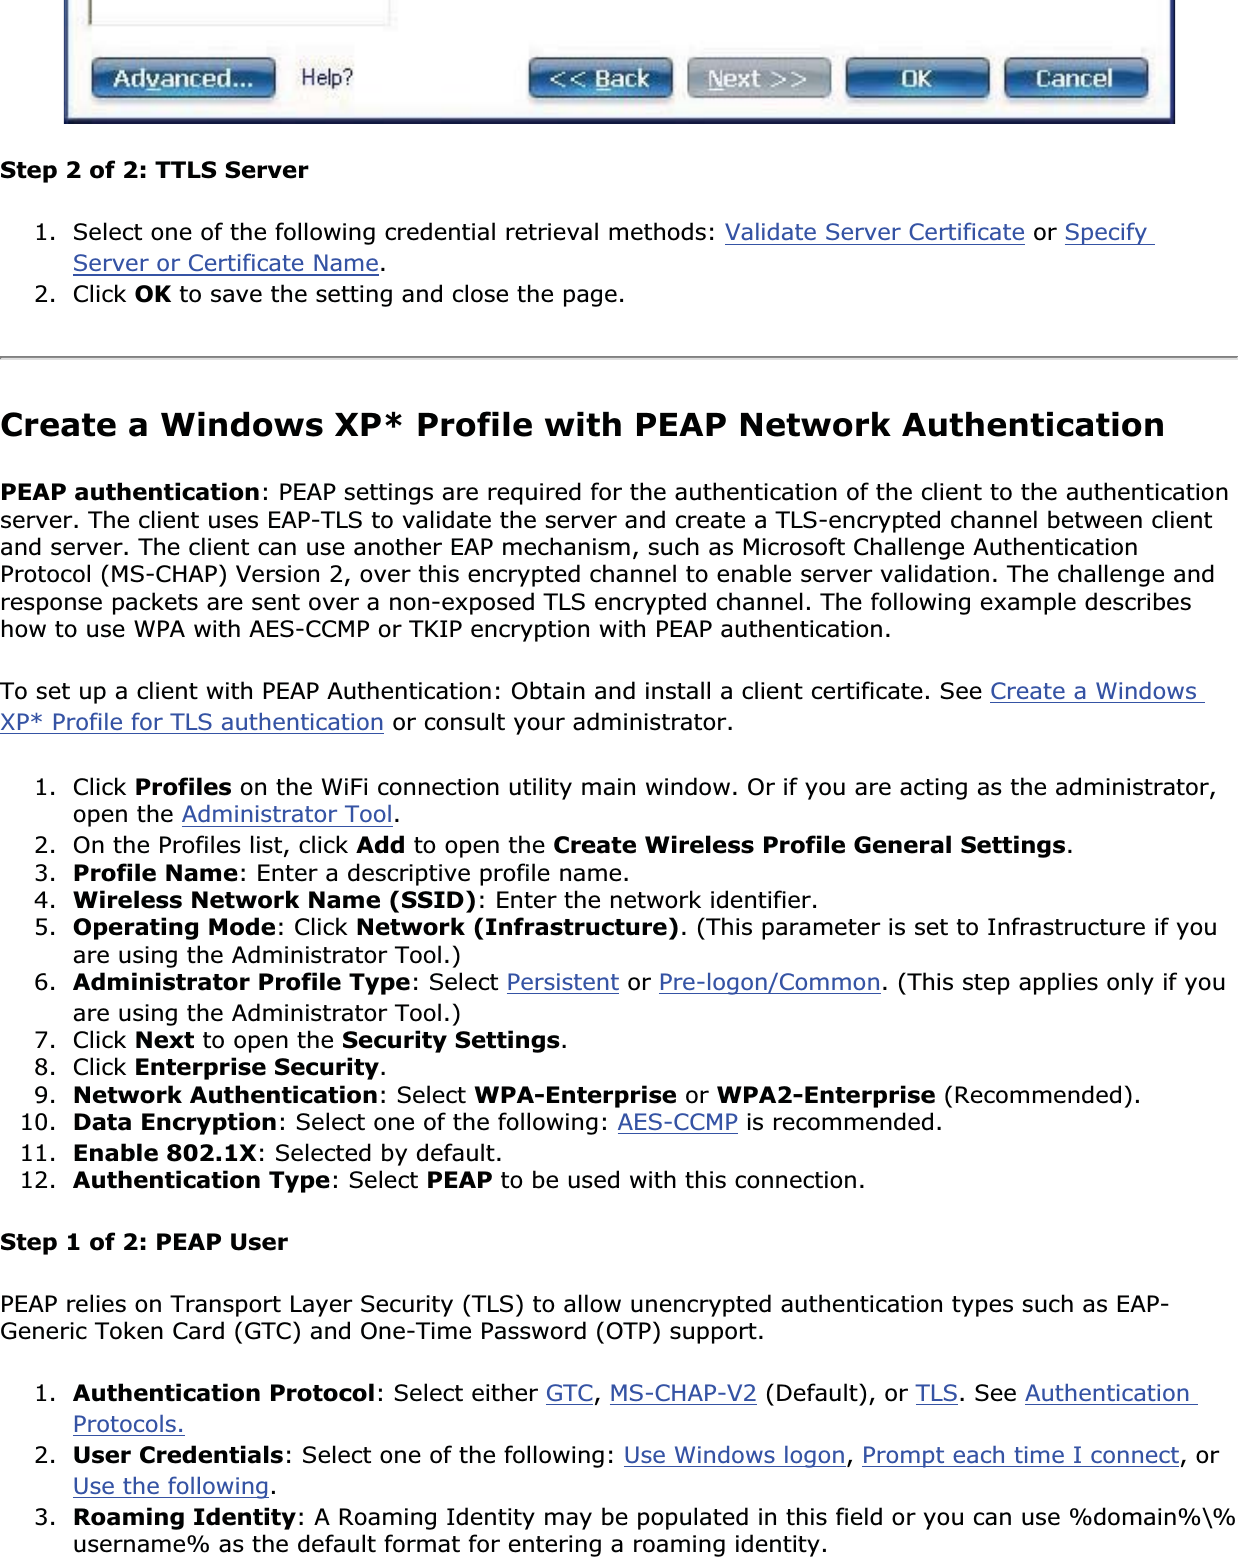 Step 2 of 2: TTLS Server1. Select one of the following credential retrieval methods: Validate Server Certificate or SpecifyServer or Certificate Name.2. Click OK to save the setting and close the page.Create a Windows XP* Profile with PEAP Network Authentication PEAP authentication: PEAP settings are required for the authentication of the client to the authentication server. The client uses EAP-TLS to validate the server and create a TLS-encrypted channel between client and server. The client can use another EAP mechanism, such as Microsoft Challenge Authentication Protocol (MS-CHAP) Version 2, over this encrypted channel to enable server validation. The challenge and response packets are sent over a non-exposed TLS encrypted channel. The following example describes how to use WPA with AES-CCMP or TKIP encryption with PEAP authentication.To set up a client with PEAP Authentication: Obtain and install a client certificate. See Create a Windows XP* Profile for TLS authentication or consult your administrator.1. Click Profiles on the WiFi connection utility main window. Or if you are acting as the administrator, open the Administrator Tool.2. On the Profiles list, click Add to open the Create Wireless Profile General Settings.3. Profile Name: Enter a descriptive profile name.4. Wireless Network Name (SSID): Enter the network identifier.5. Operating Mode: Click Network (Infrastructure). (This parameter is set to Infrastructure if you are using the Administrator Tool.)6. Administrator Profile Type: Select Persistent or Pre-logon/Common. (This step applies only if you are using the Administrator Tool.)7. Click Next to open the Security Settings.8. Click Enterprise Security.9. Network Authentication: Select WPA-Enterprise or WPA2-Enterprise (Recommended).10. Data Encryption: Select one of the following: AES-CCMP is recommended. 11. Enable 802.1X: Selected by default.12. Authentication Type: Select PEAP to be used with this connection.Step 1 of 2: PEAP UserPEAP relies on Transport Layer Security (TLS) to allow unencrypted authentication types such as EAP-Generic Token Card (GTC) and One-Time Password (OTP) support. 1. Authentication Protocol: Select either GTC,MS-CHAP-V2 (Default), or TLS. See AuthenticationProtocols.2. User Credentials: Select one of the following: Use Windows logon,Prompt each time I connect, or Use the following.3. Roaming Identity: A Roaming Identity may be populated in this field or you can use %domain%\%username% as the default format for entering a roaming identity. 